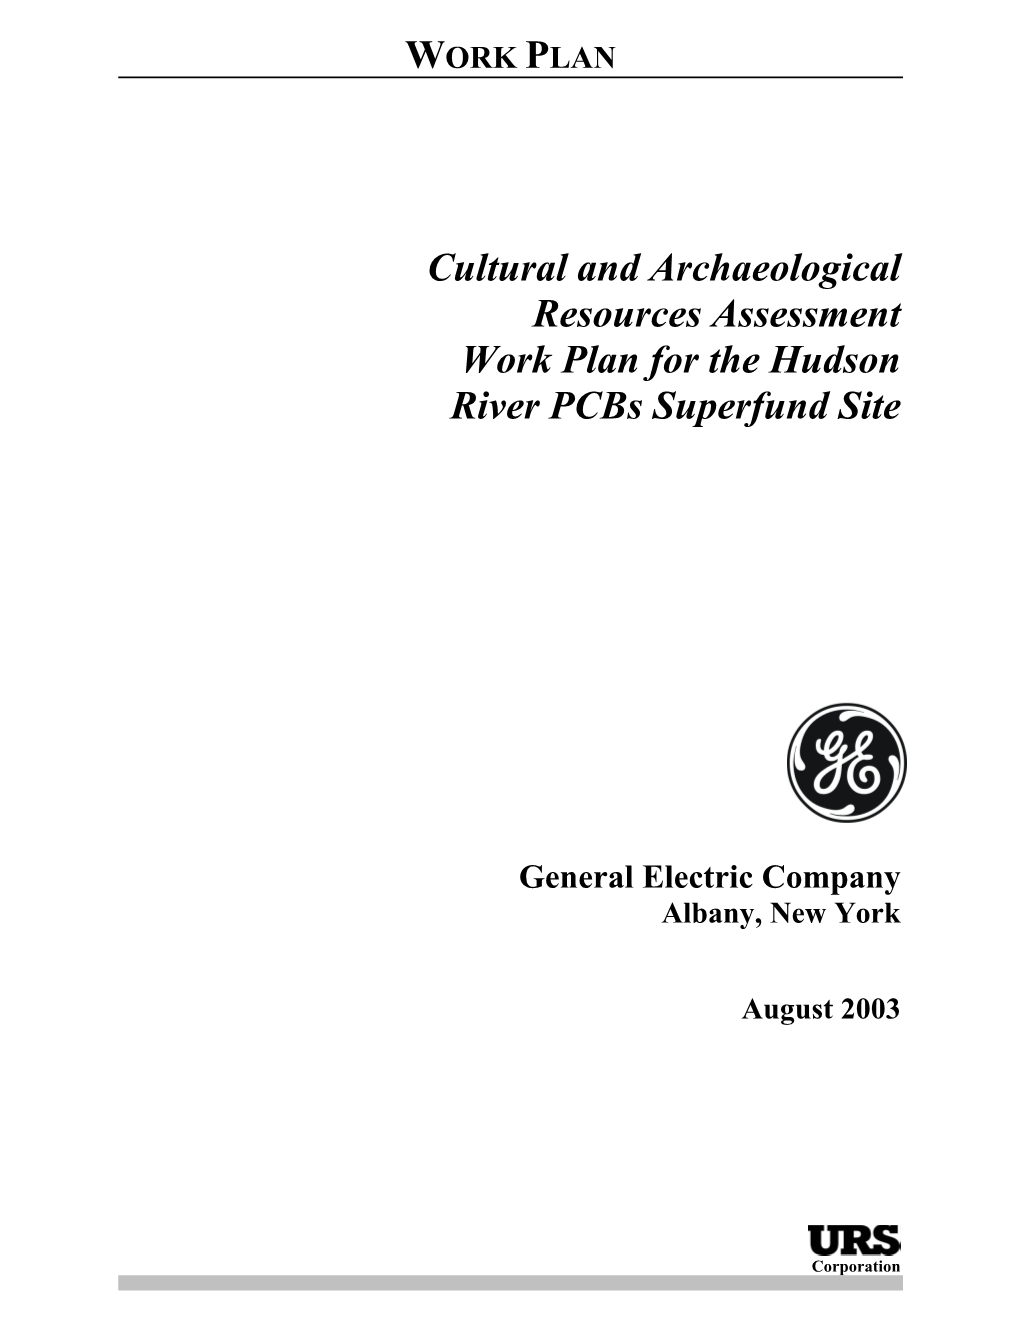 Cultural Resources Work Plan for the Hudson River Pcbs Superfund Site